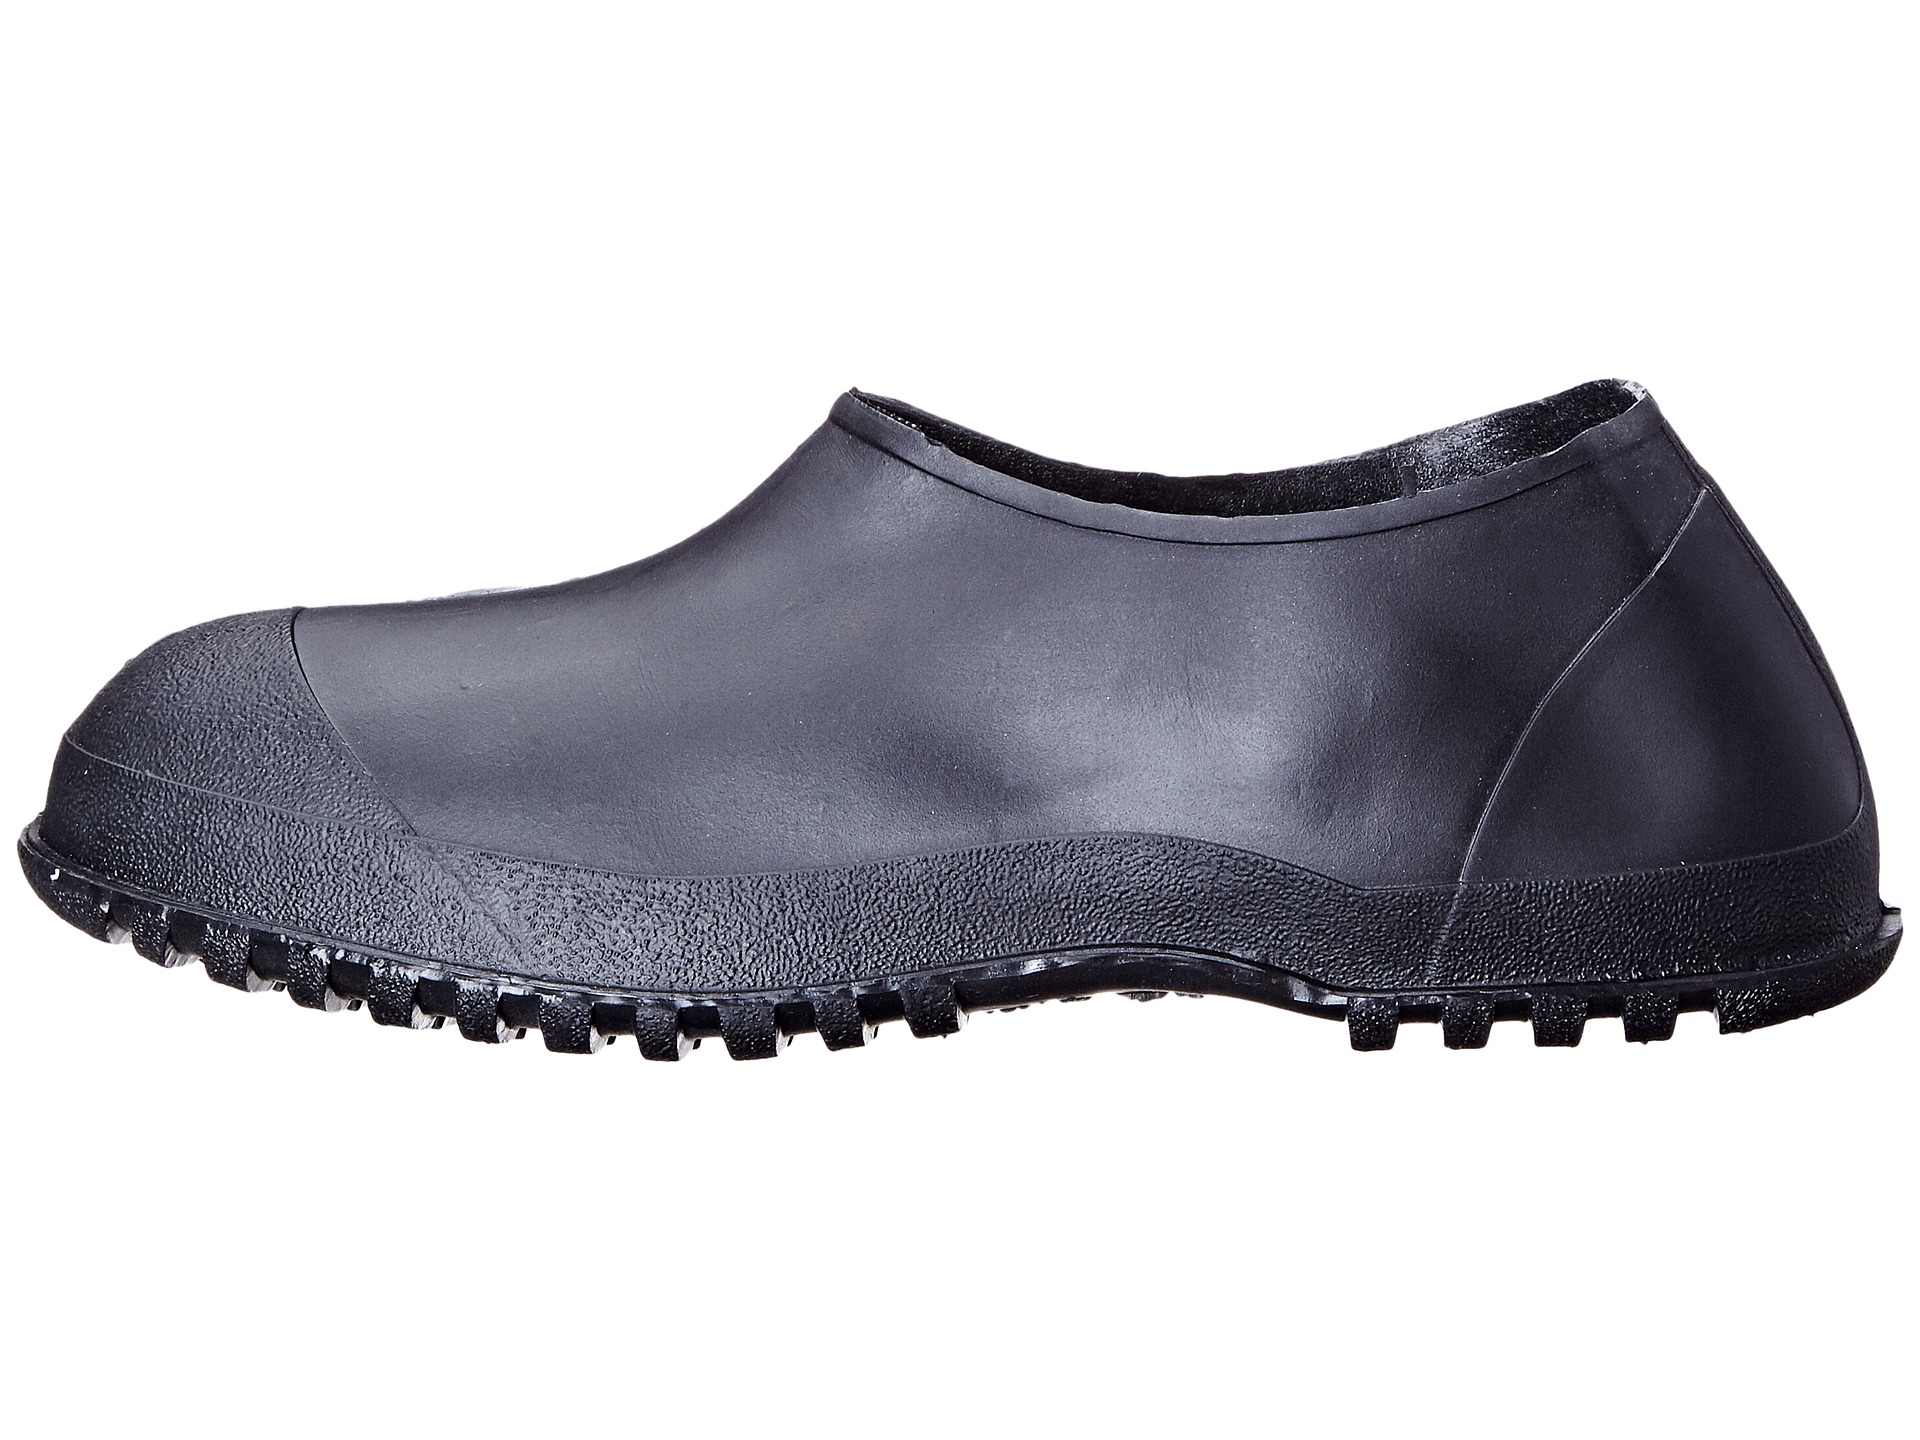 Tingley Overshoes Work Rubber - Zappos.com Free Shipping BOTH Ways